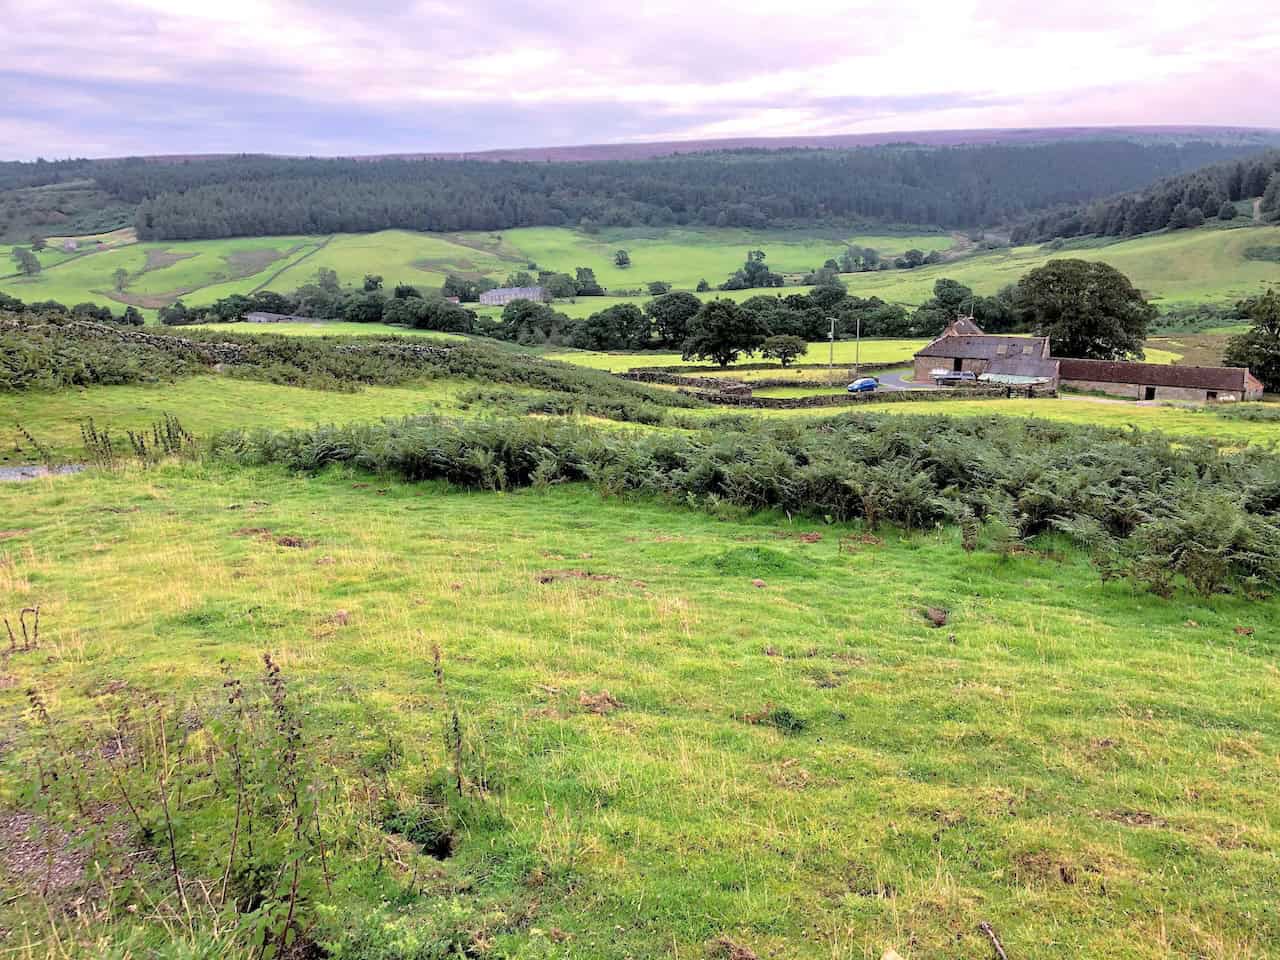 Baysdale Farm (right), with Baysdale Abbey in the distance, sits at the head of this beautiful, secluded valley.